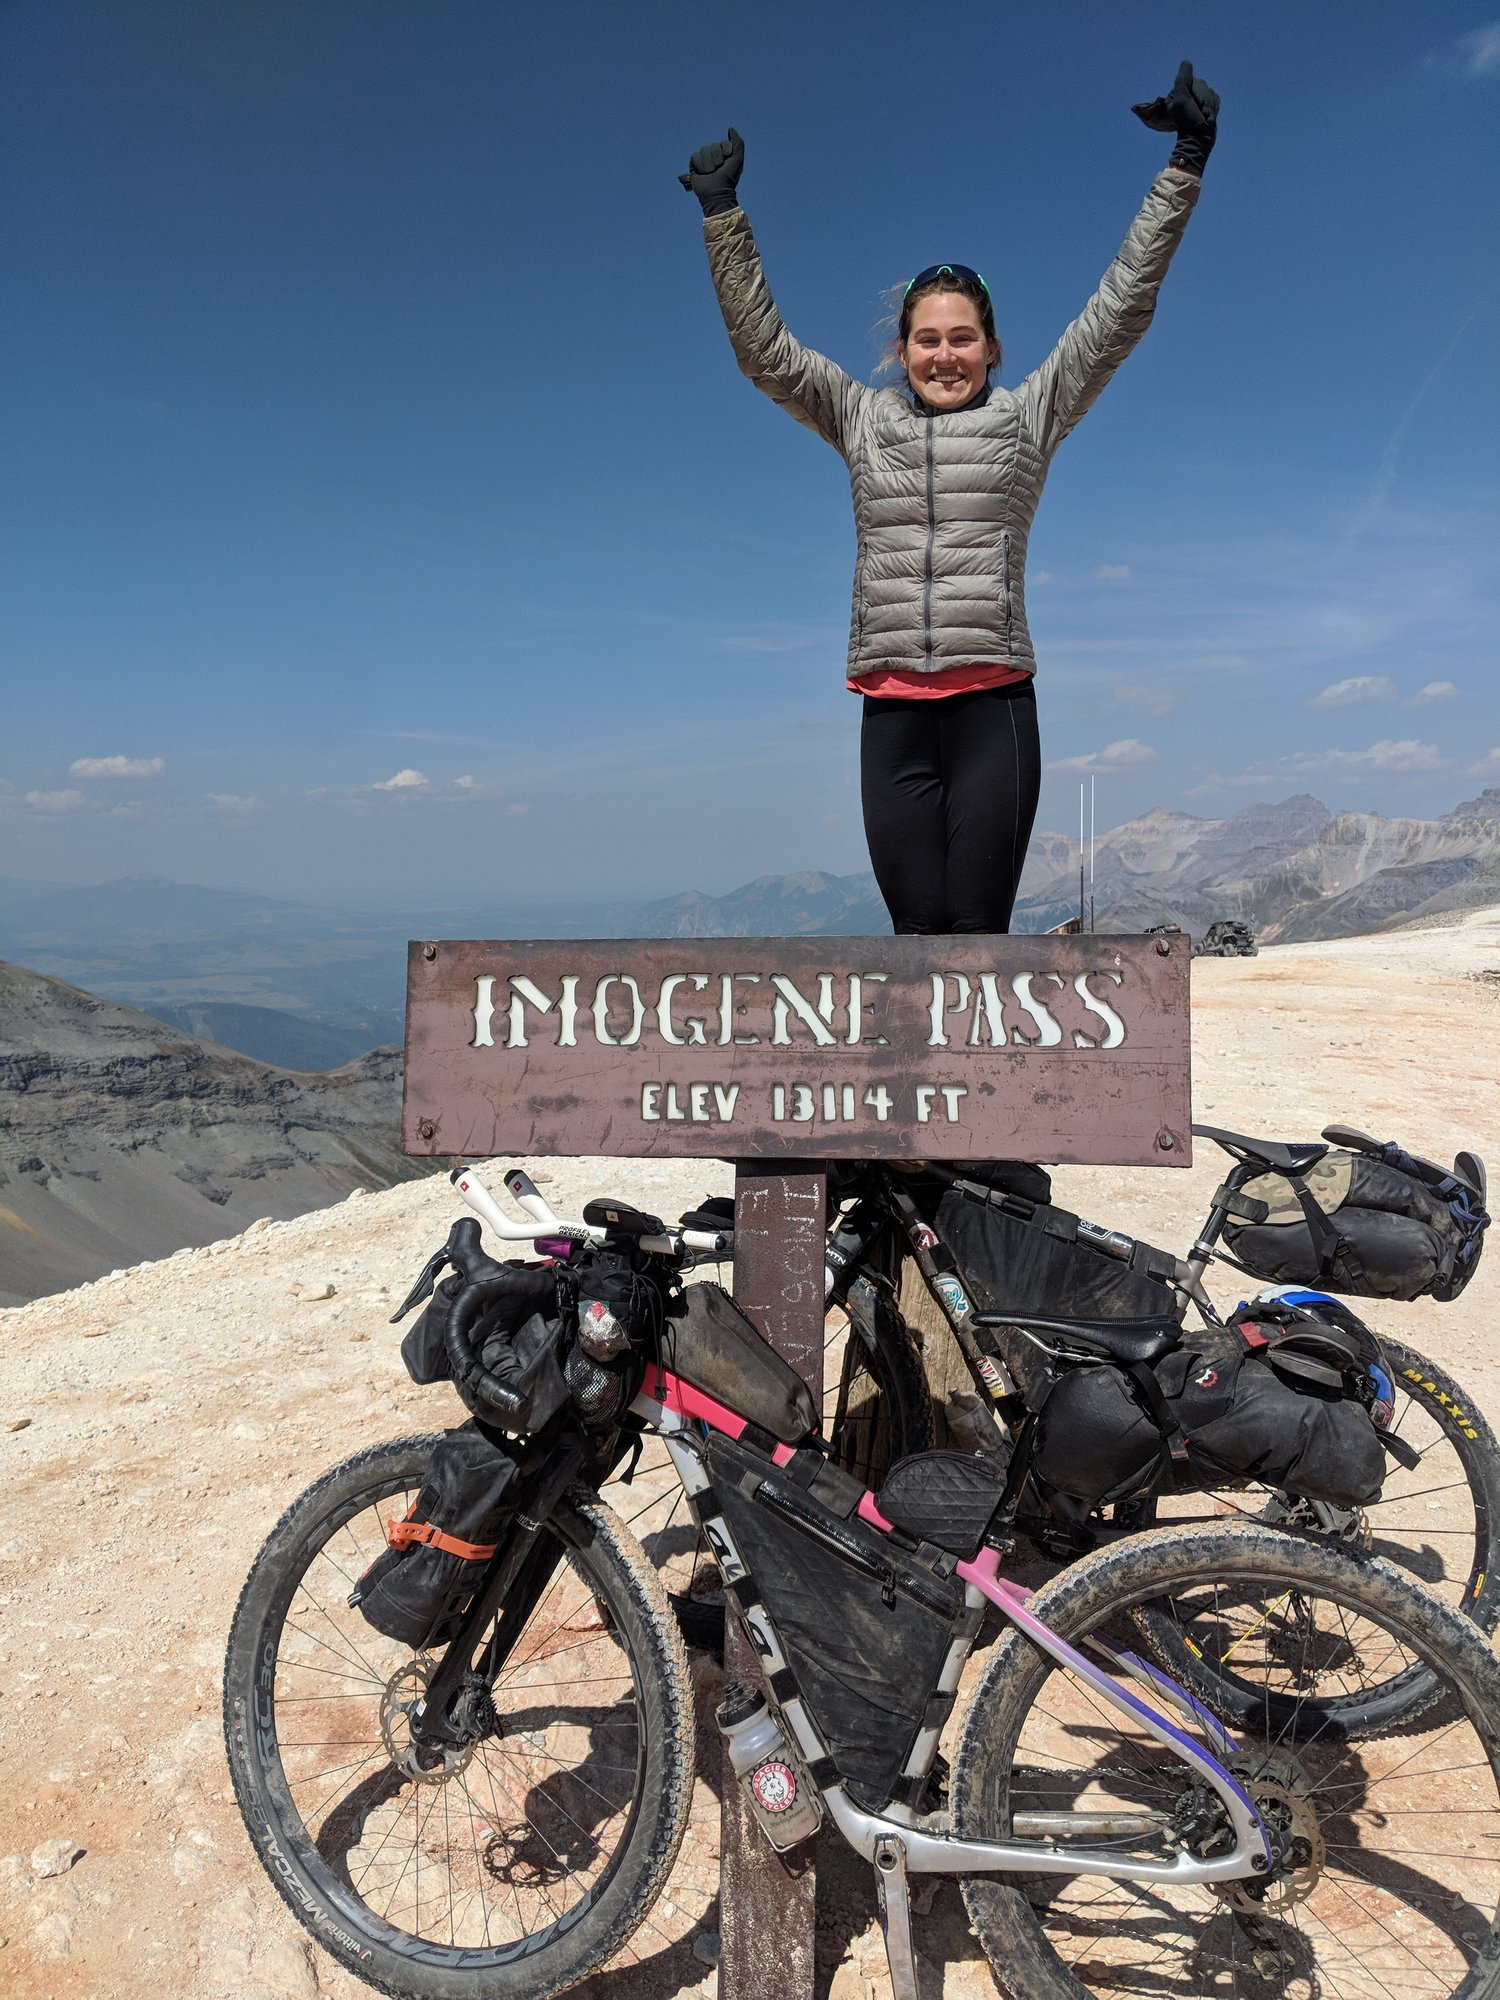 Caitlin in her victory pose on Imogene Pass